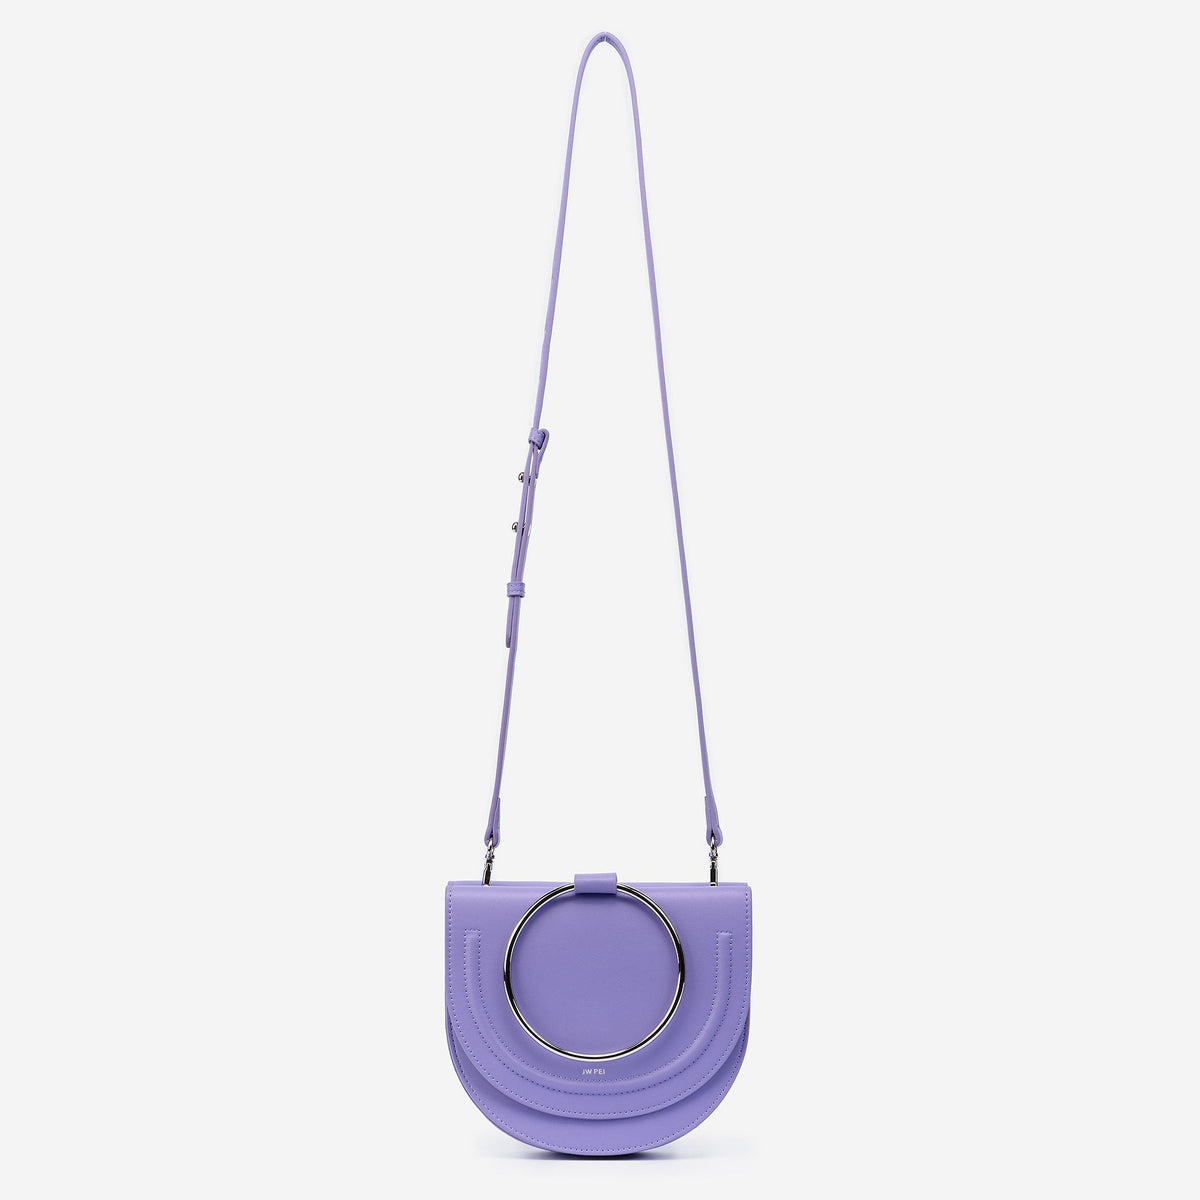 The Double Moon Crossbody - Violet – JW PEI Outlet